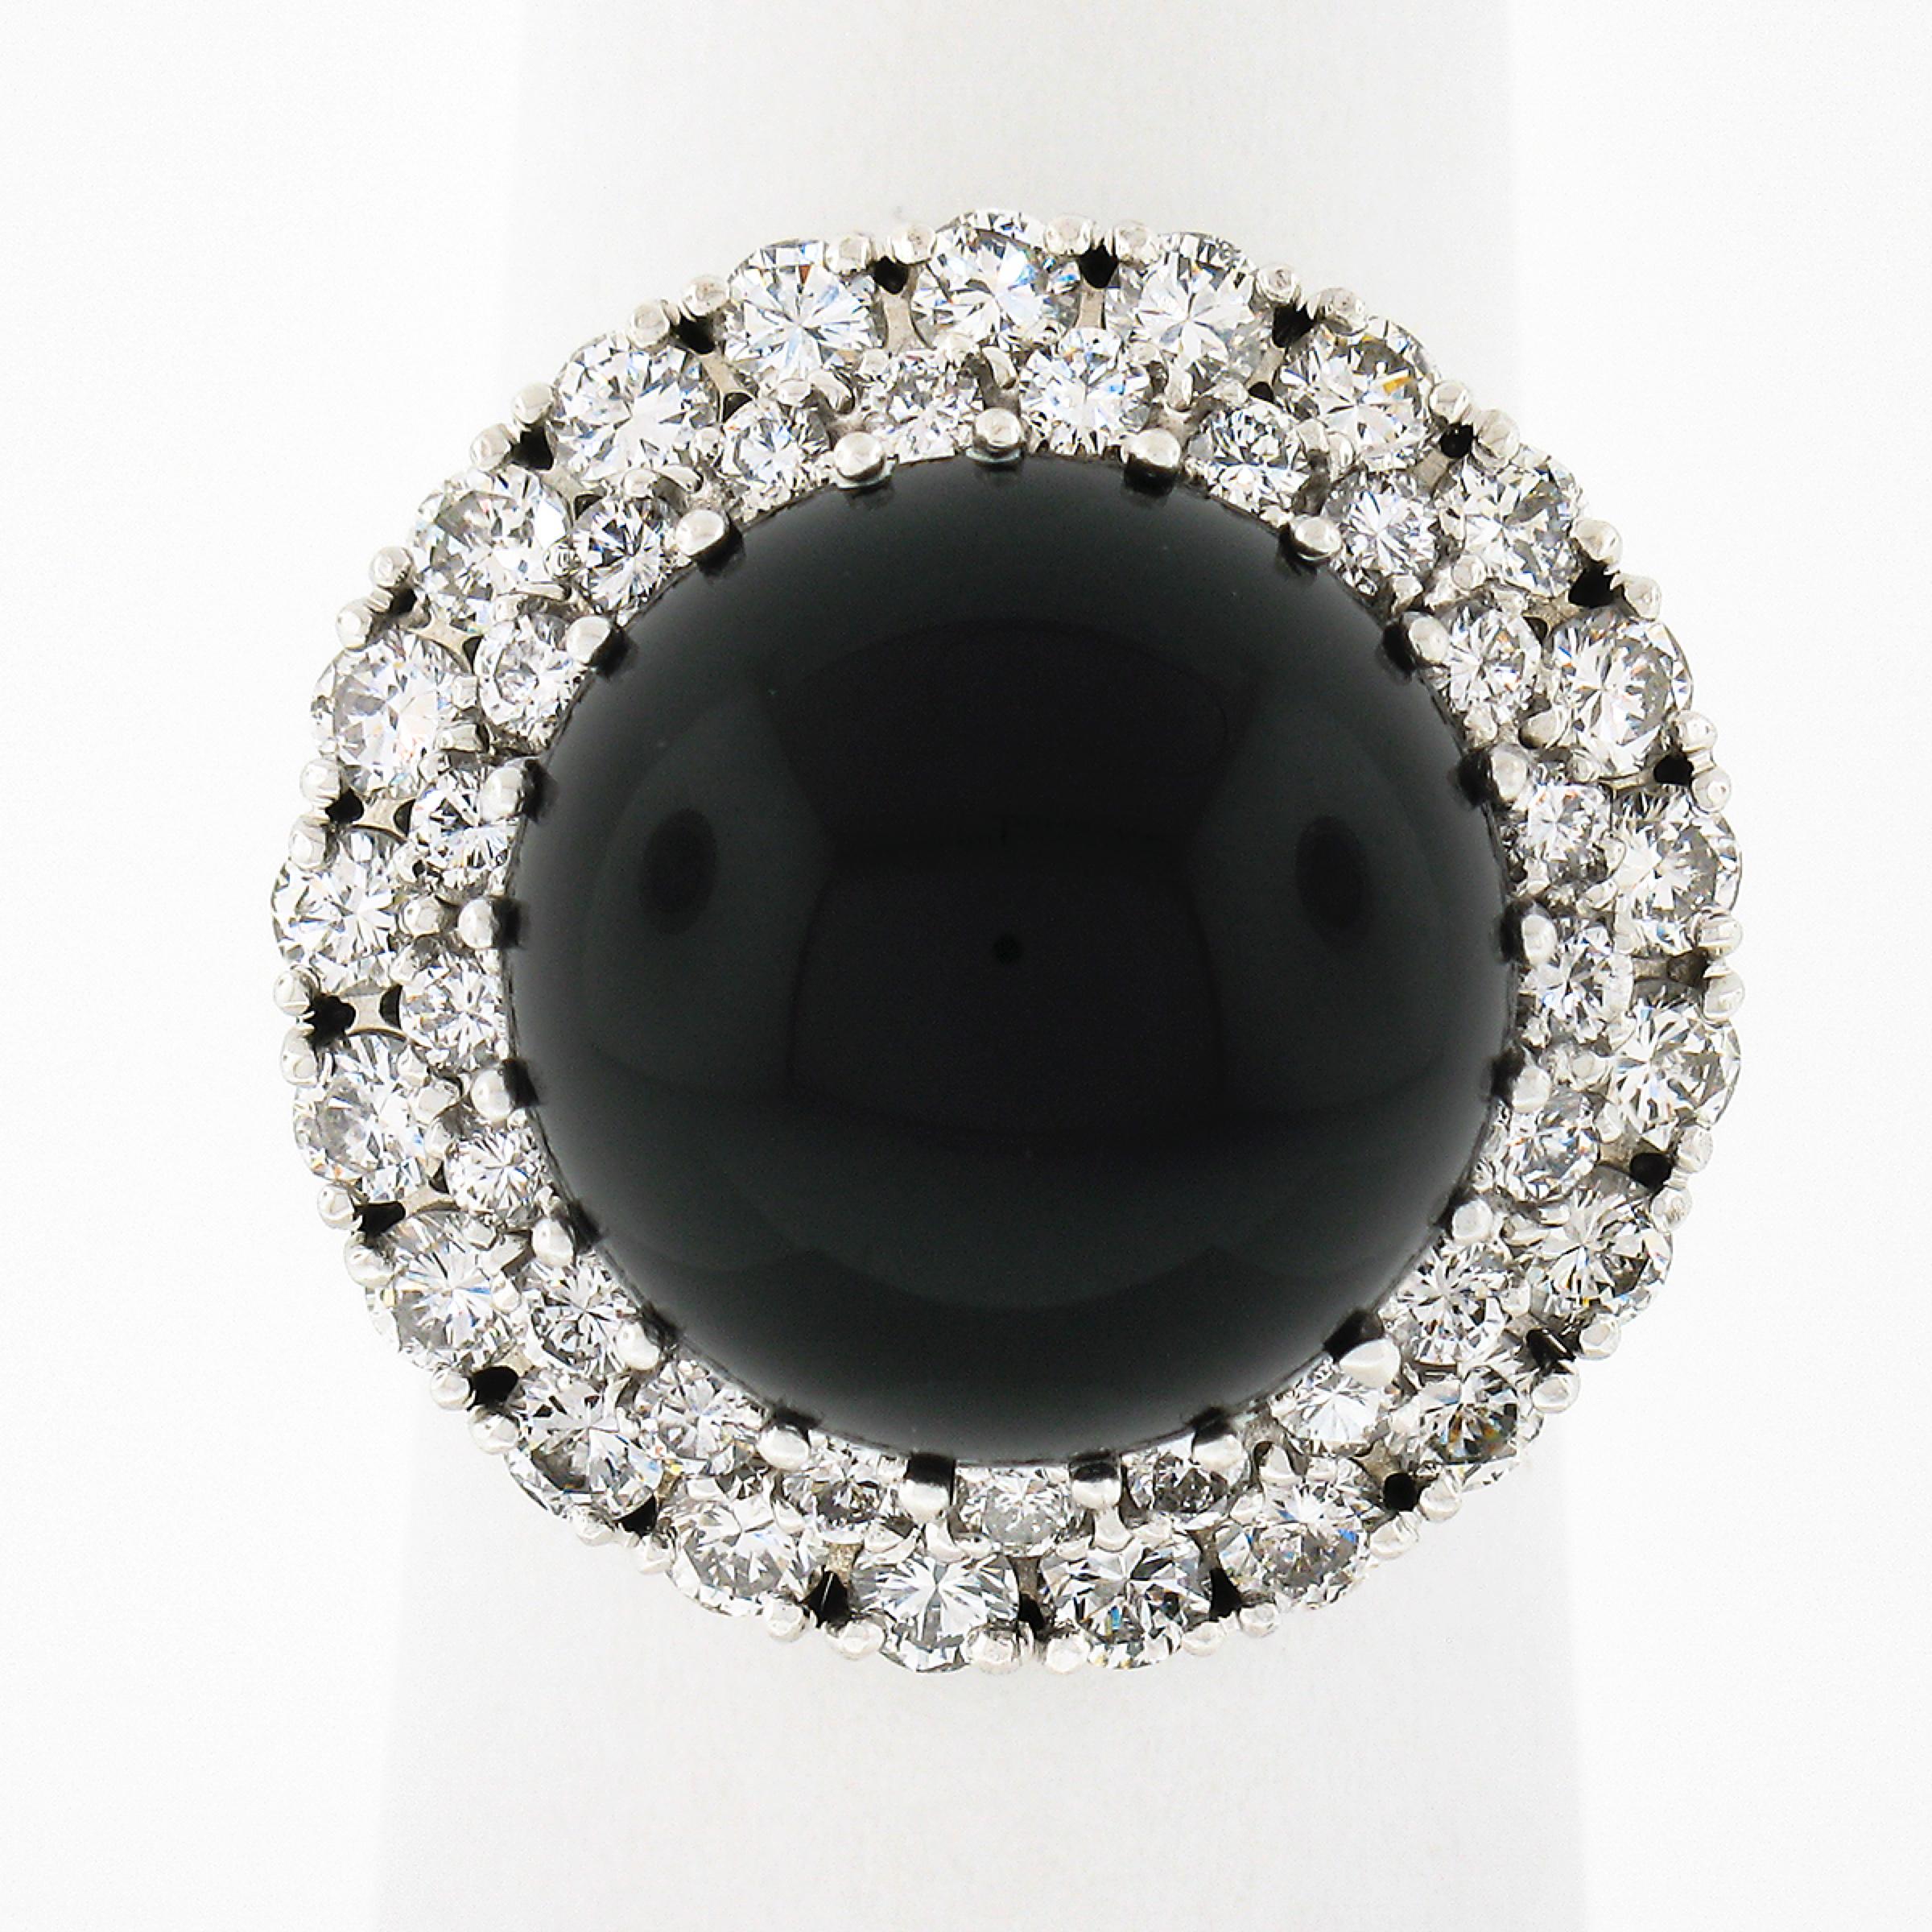 This magnificent vintage cocktail ring is crafted in solid 18k white gold and features a large black onyx solitaire with very fine diamond accents throughout. The bold round cabochon cut onyx shows a nice black color with a polished finish and is